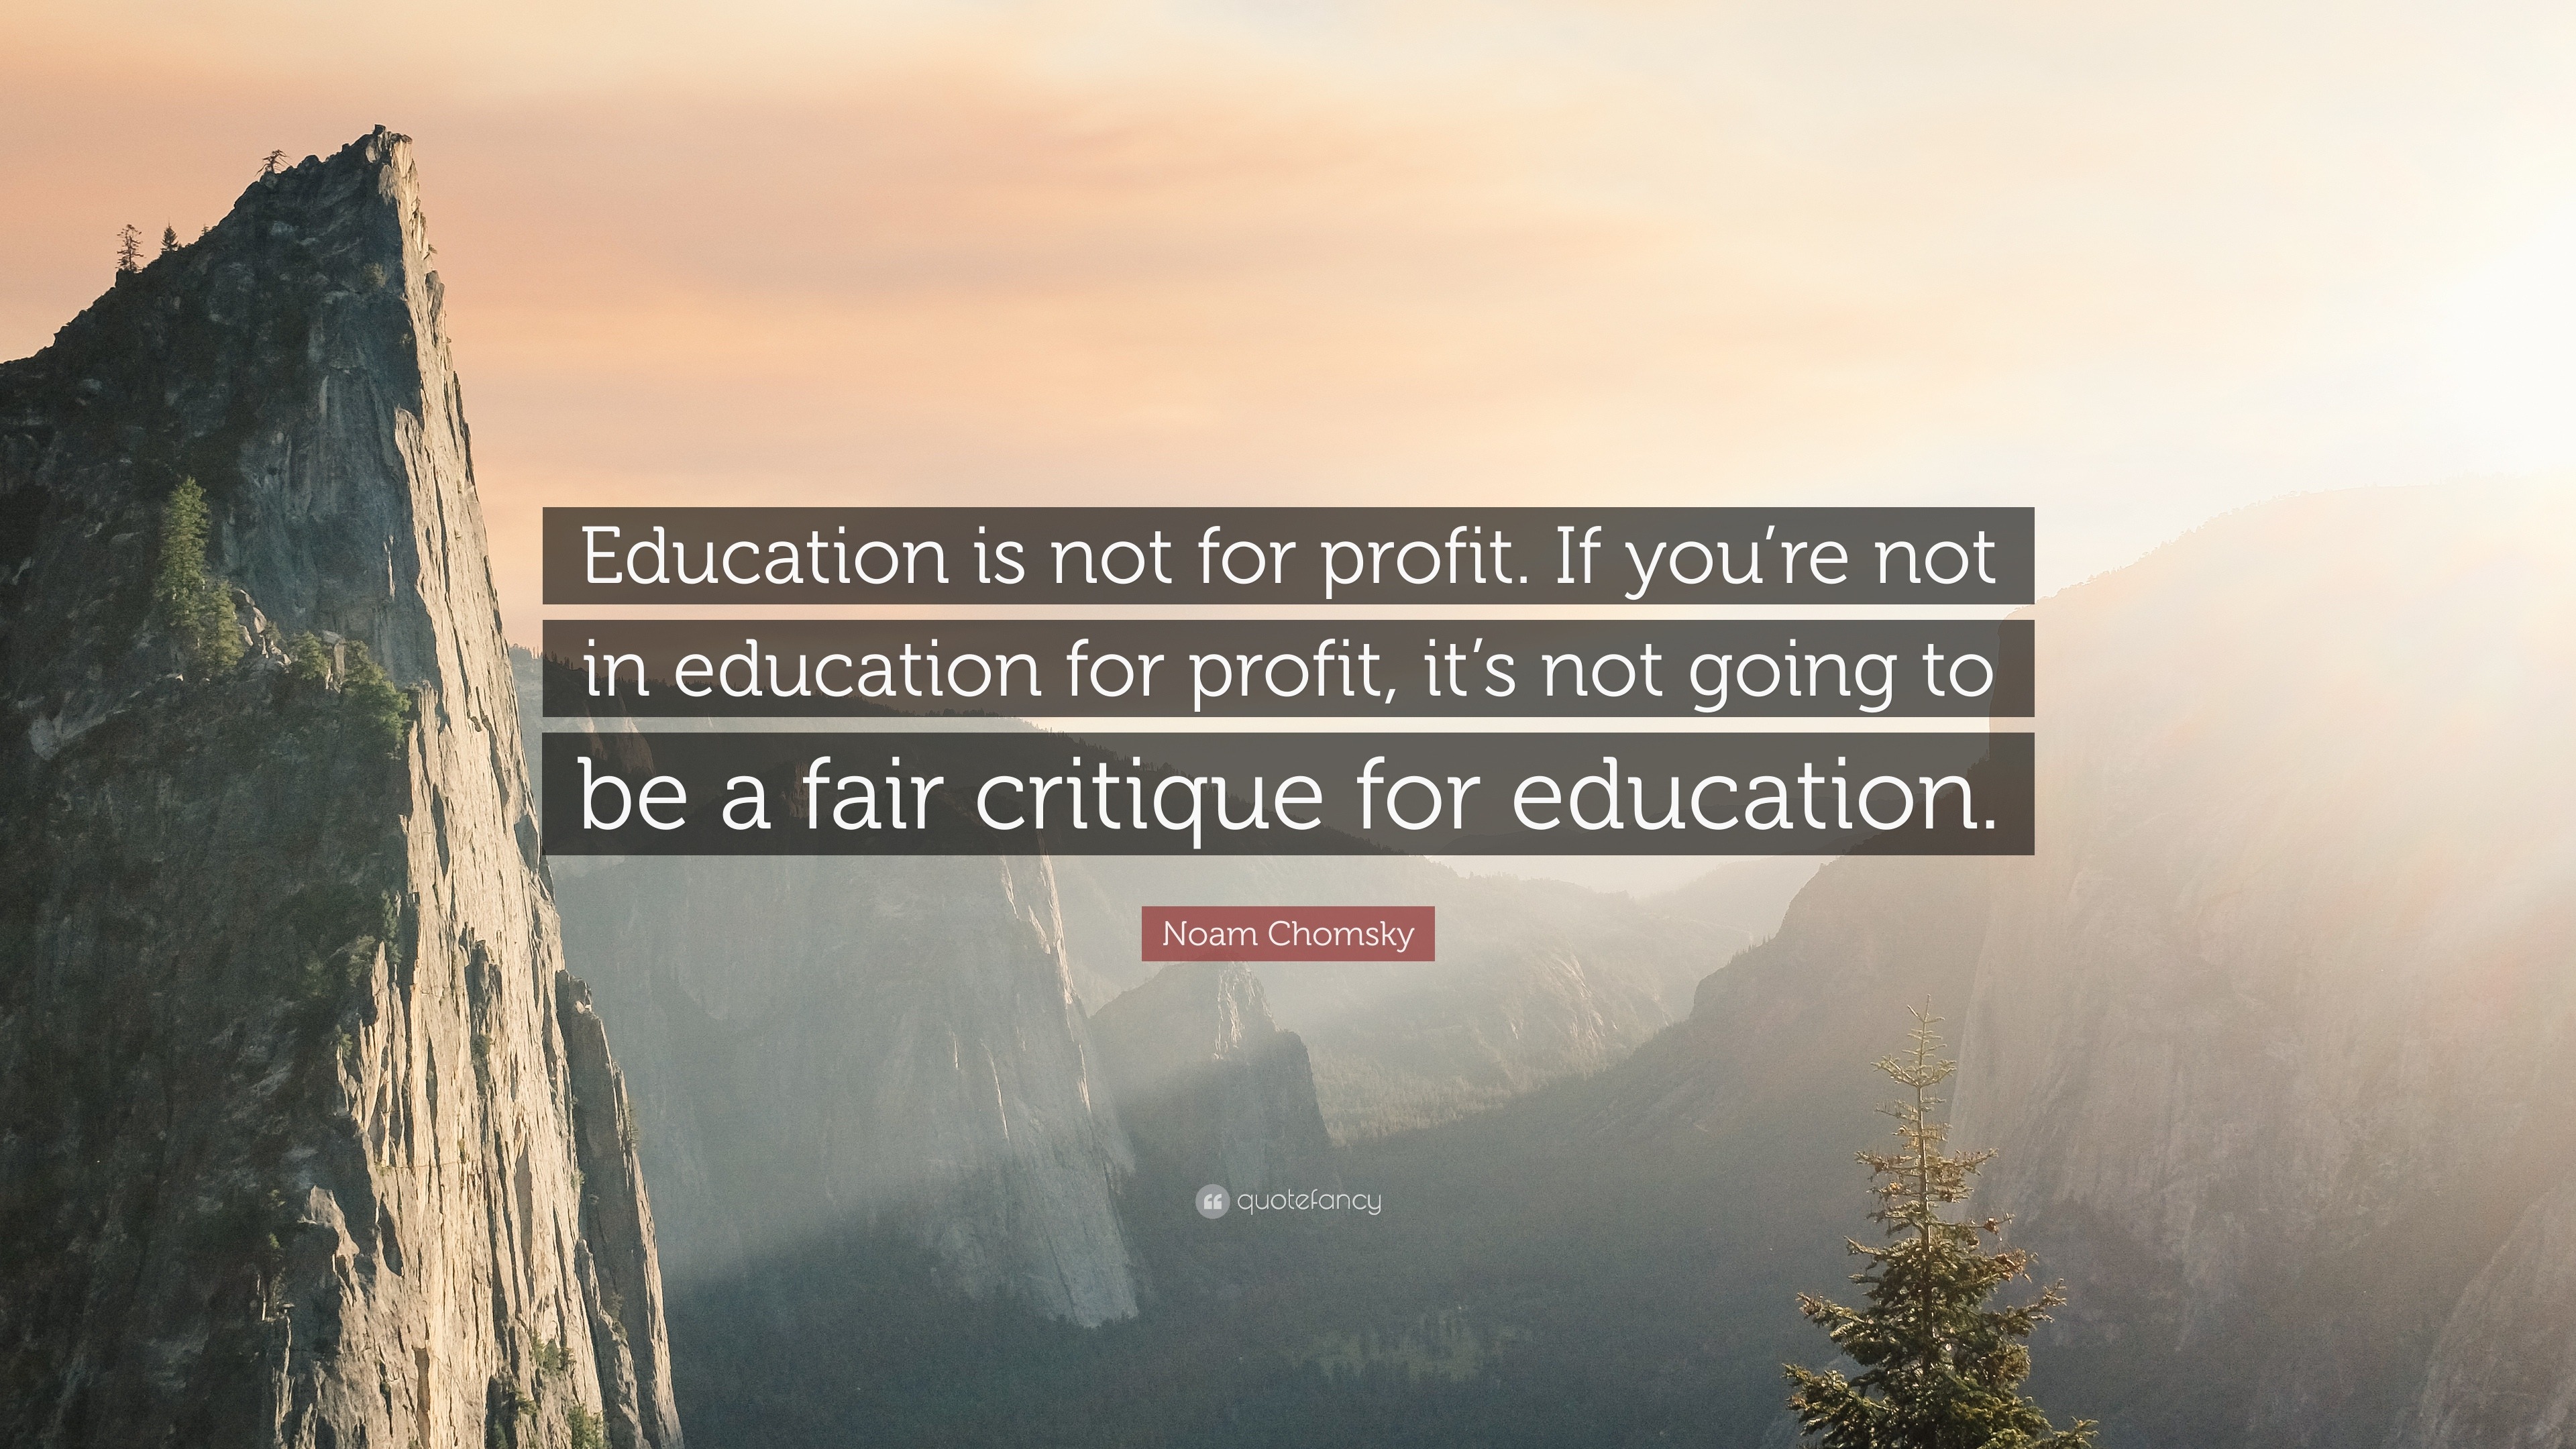 Noam Chomsky Quote: “Education is not for profit. If you’re not in